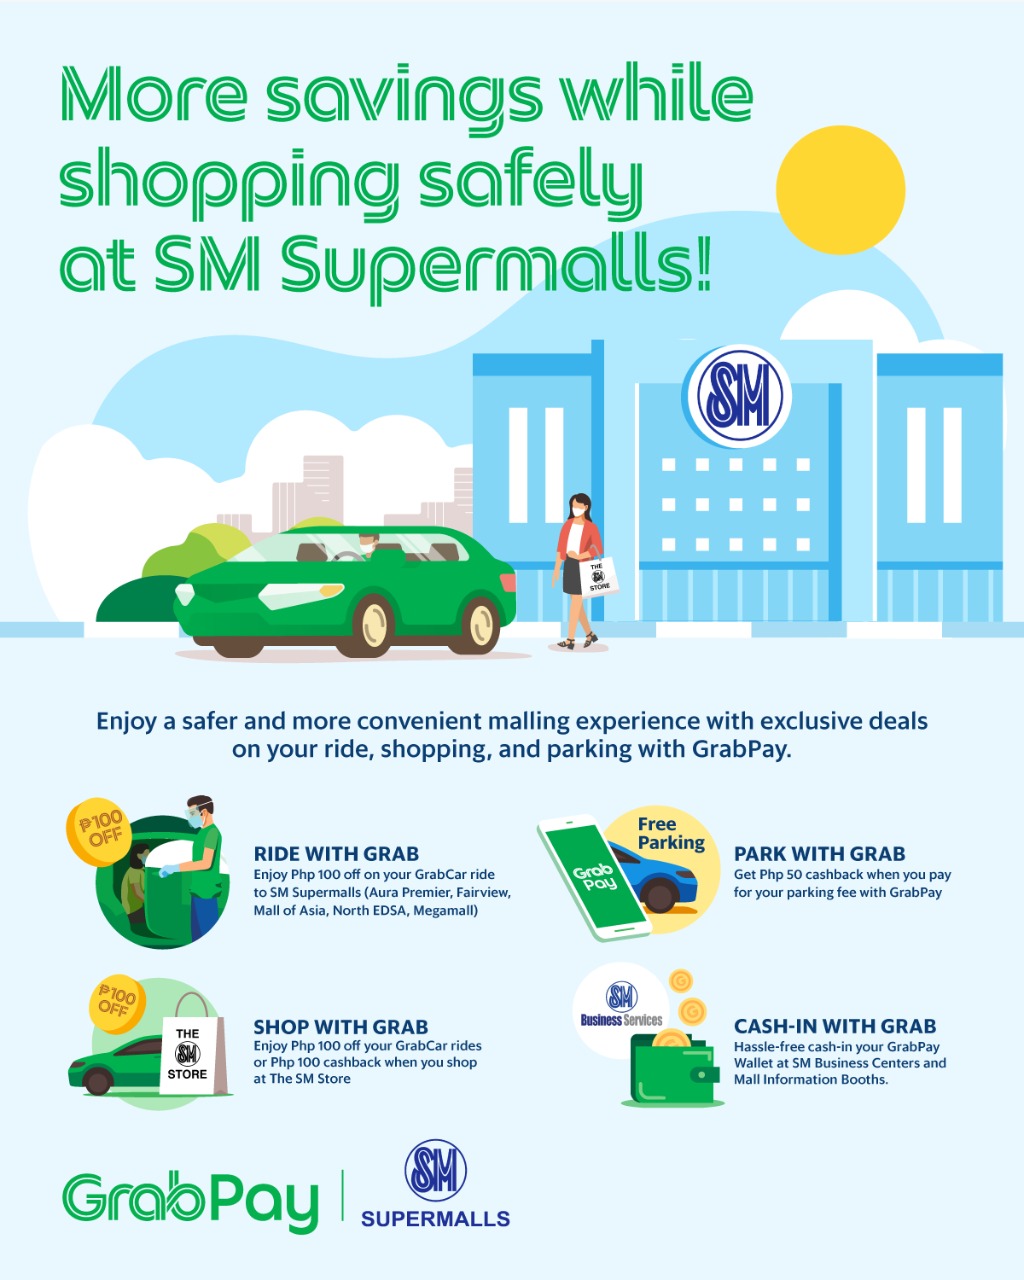 GET AMAZING DISCOUNTS AND DEALS WHEN YOU USE GRABPAY AT SM SUPERMALLS